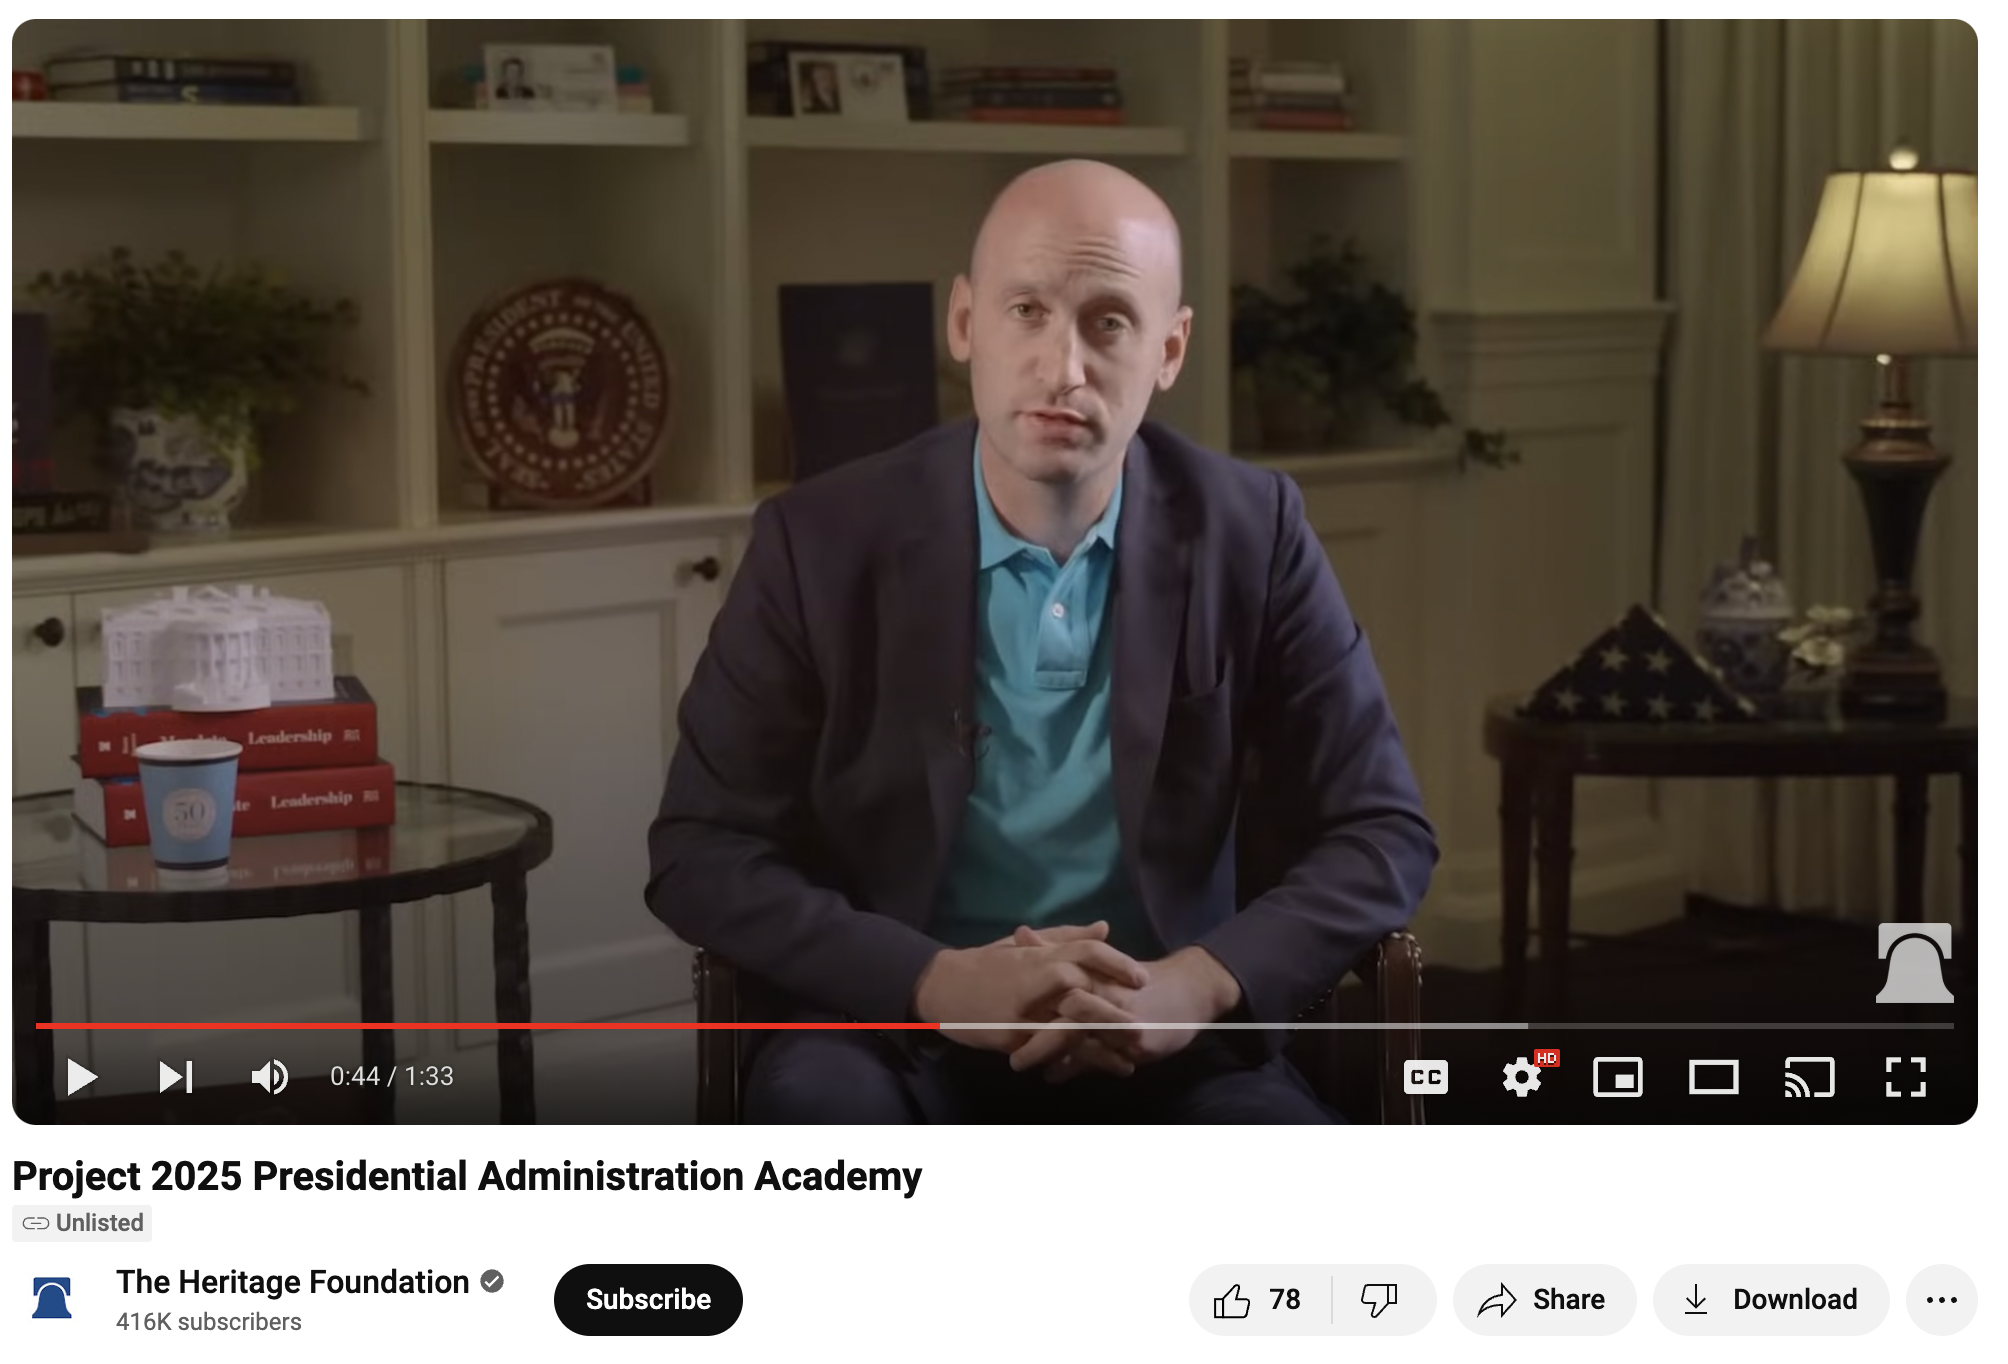 Stephen Miller attempts to distance himself from Project 2025 after appearing in recruitment video